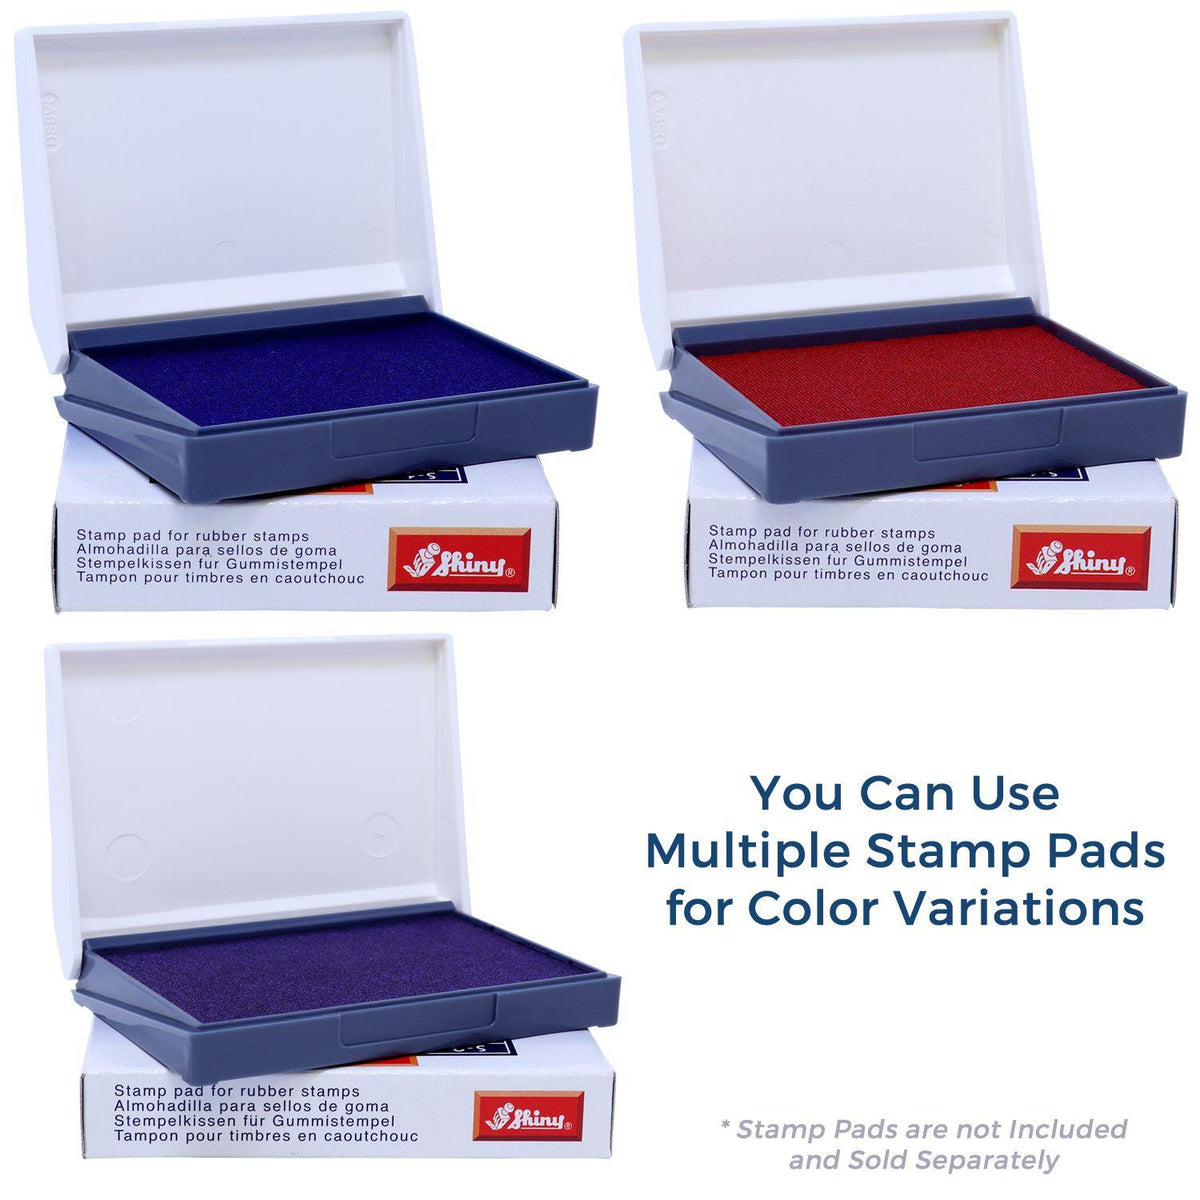 Stamp Pads for Large Draft Rubber Stamp Available